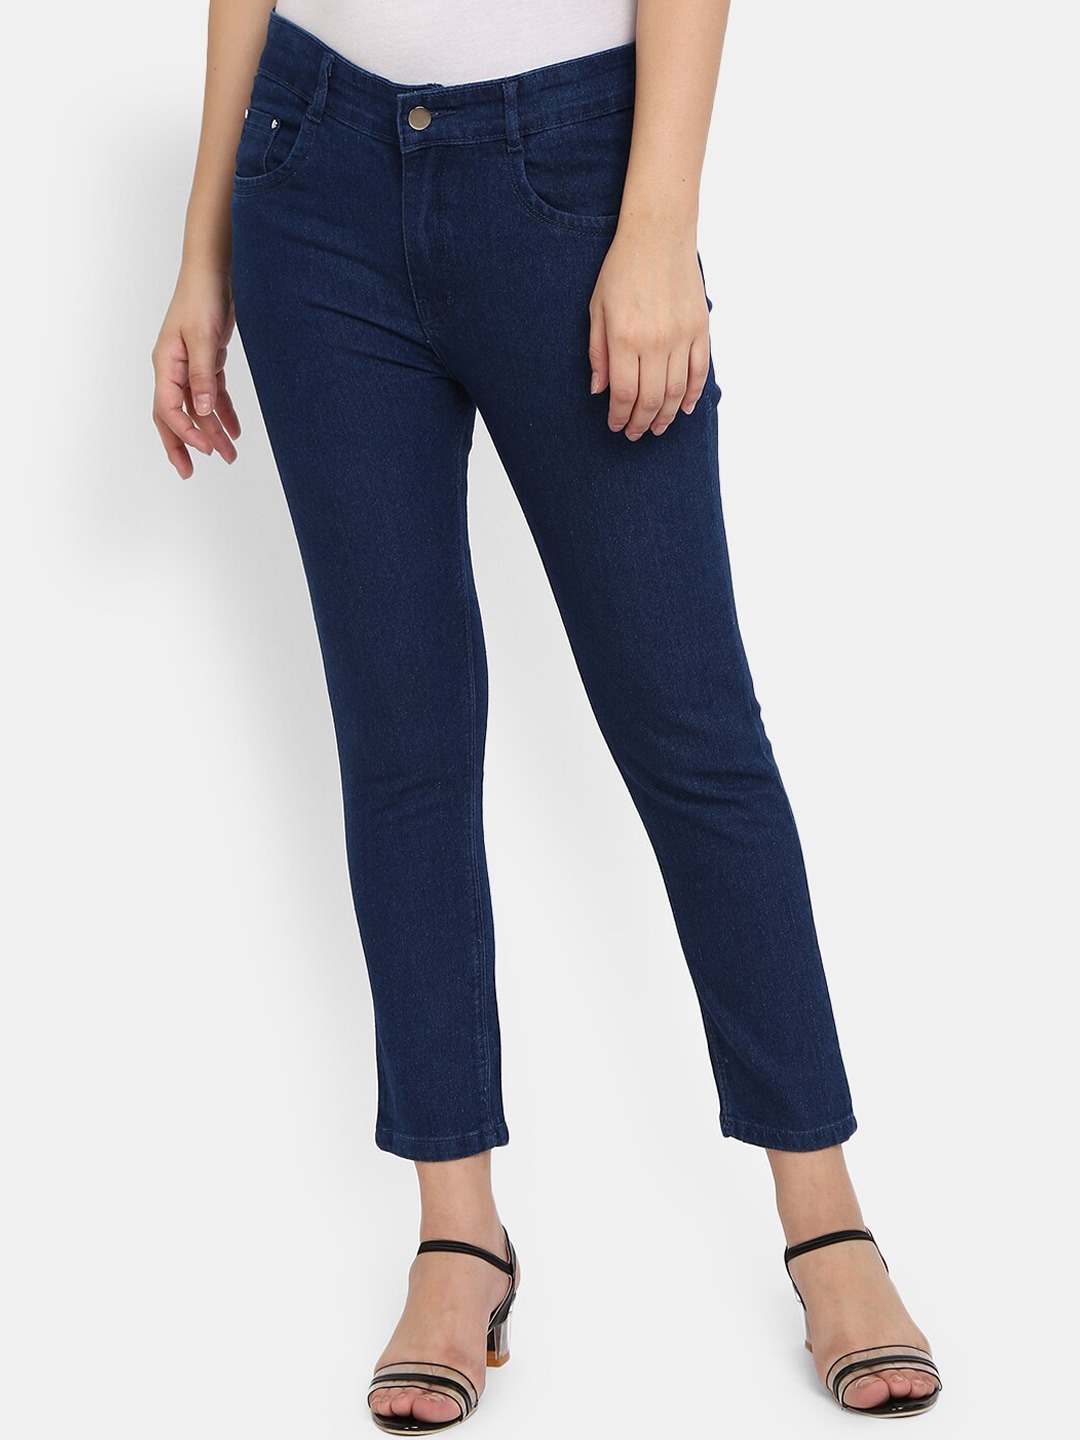 V-Mart Women Blue Jeans Price in India